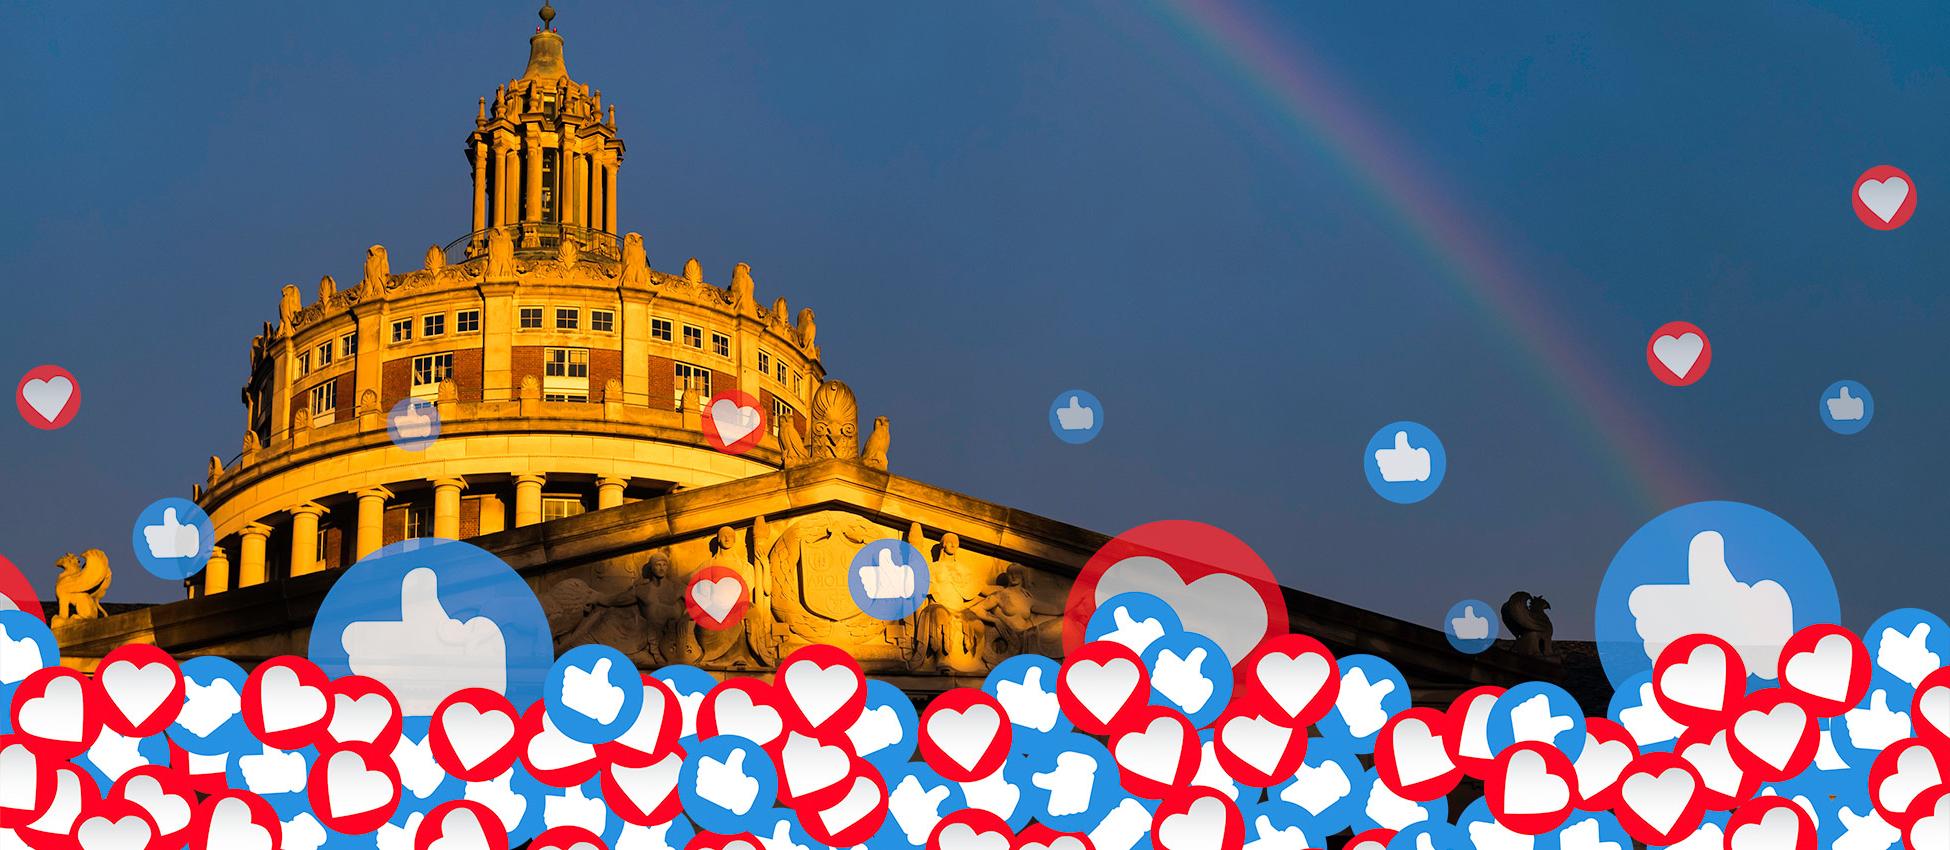 Rush Rhees Library with social media likes and hearts floating in front of it.